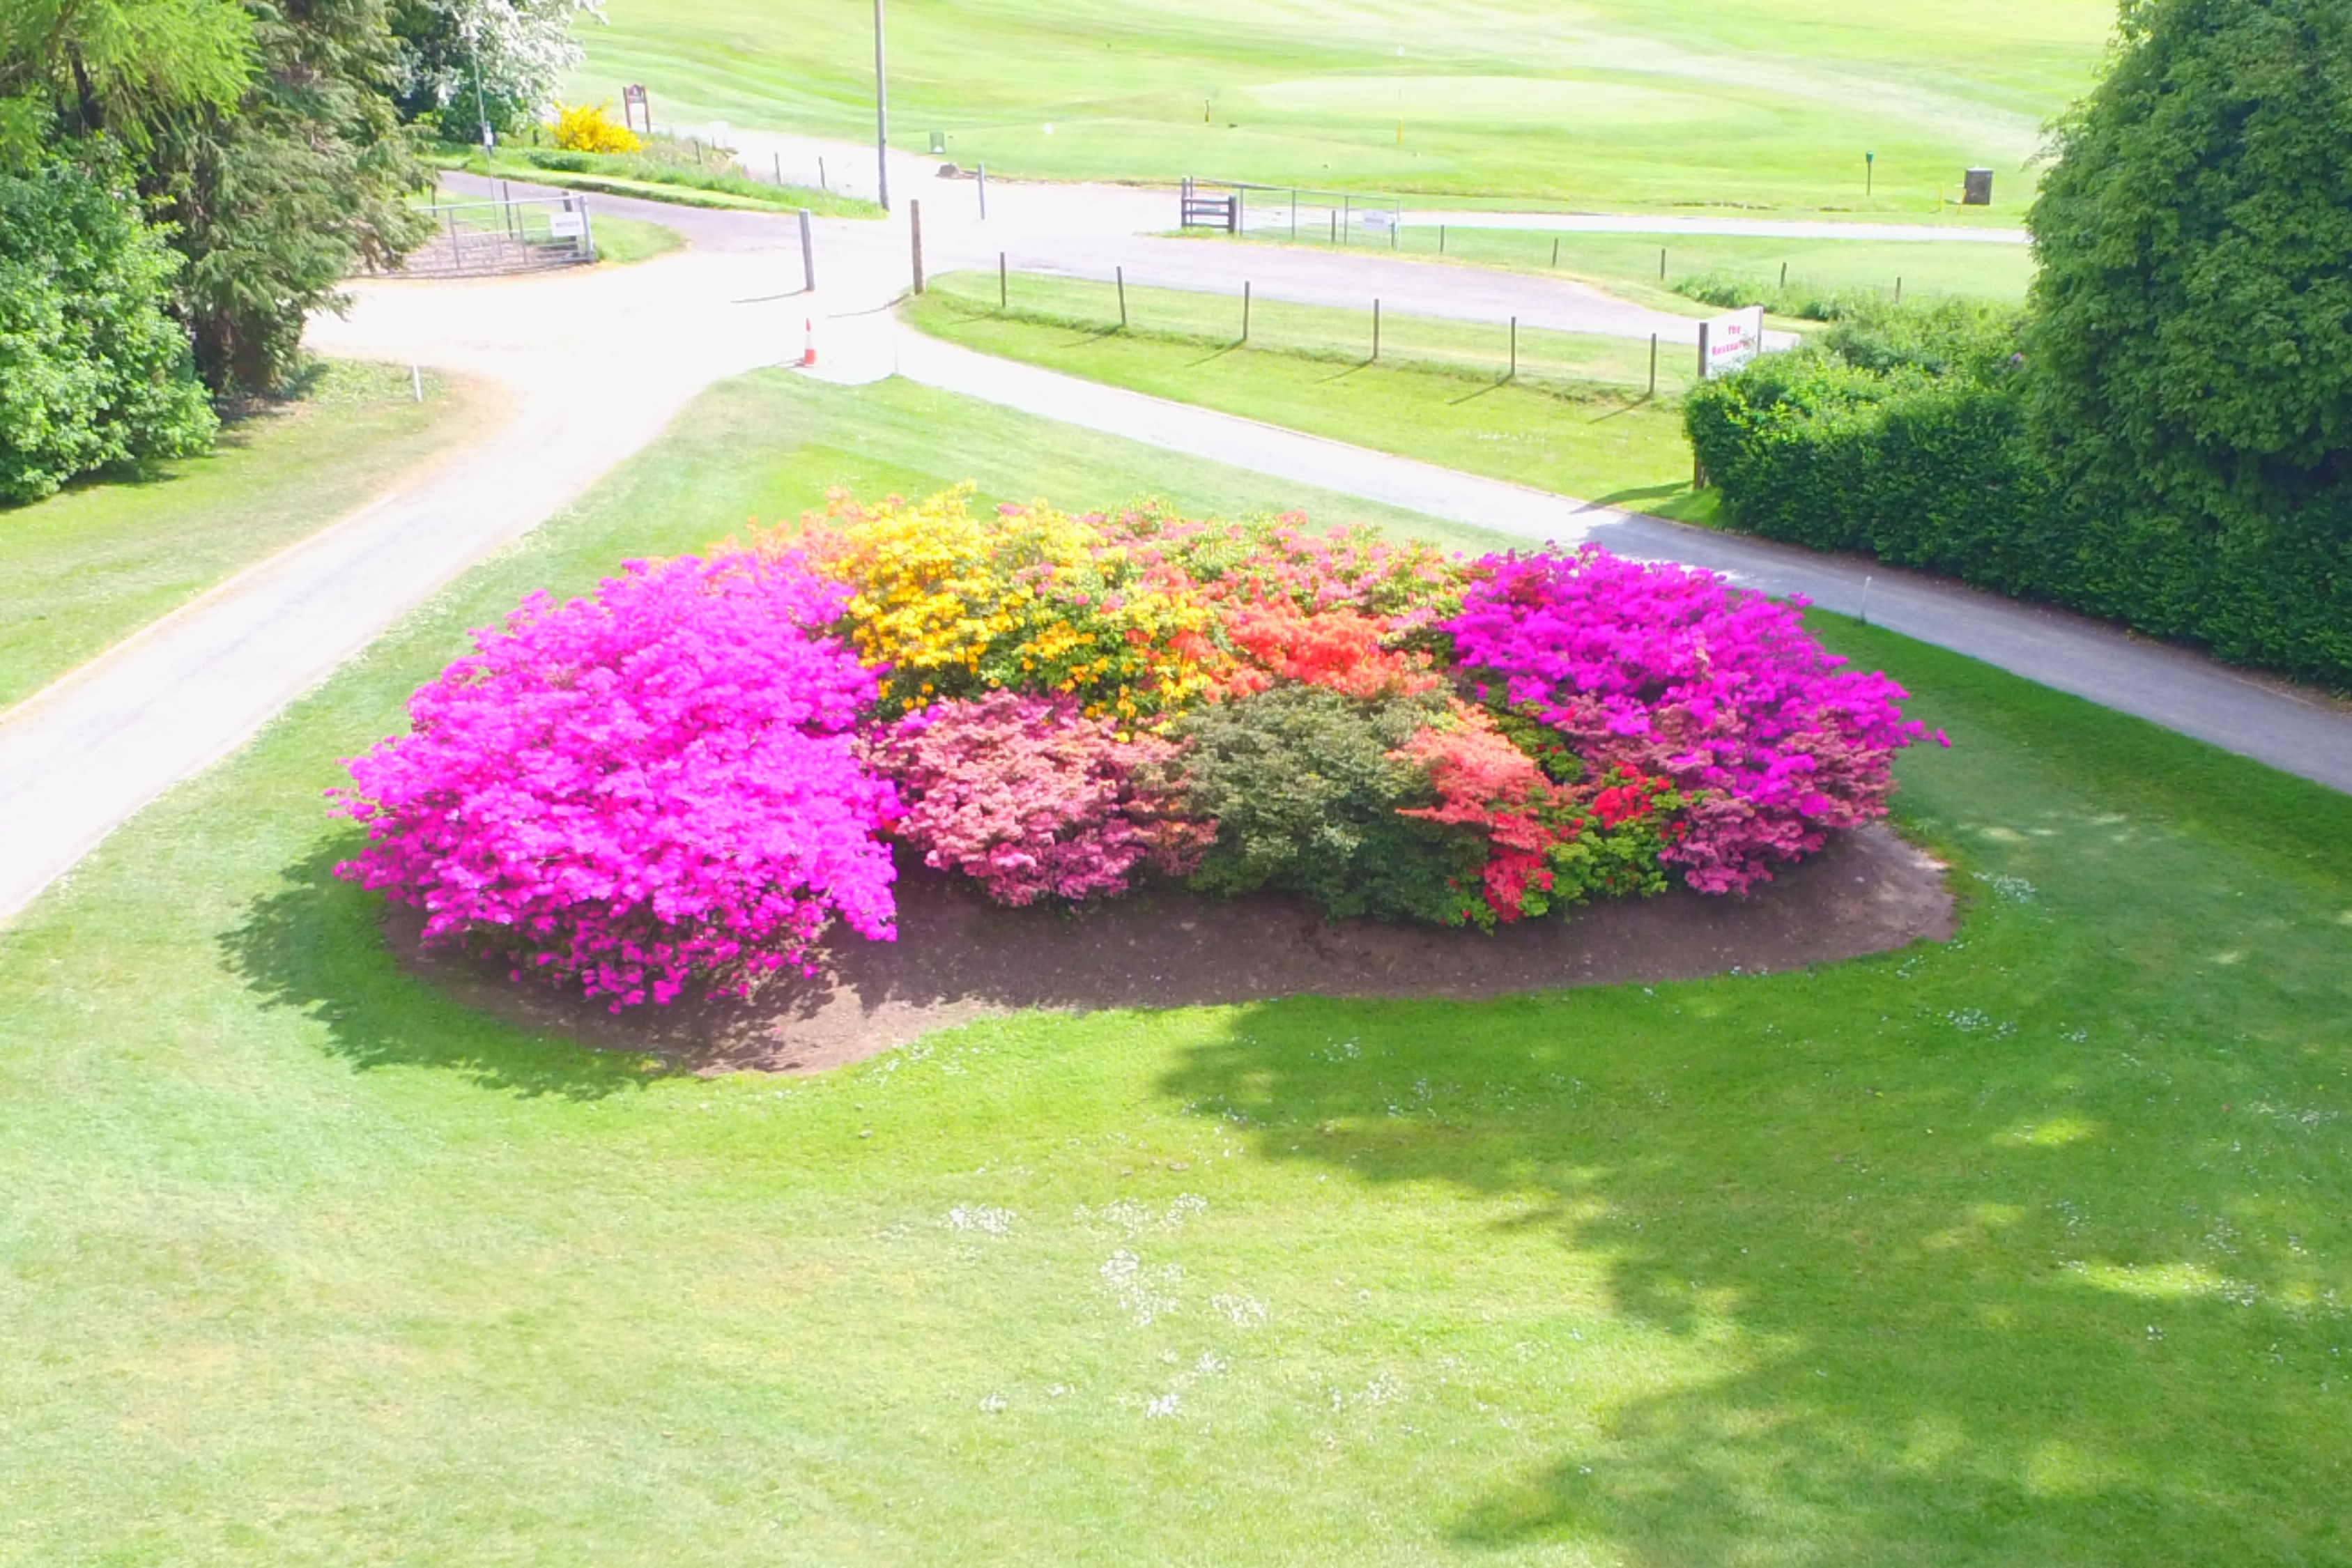 Our 'famous' azalea bush in full bloom behind the 4th green